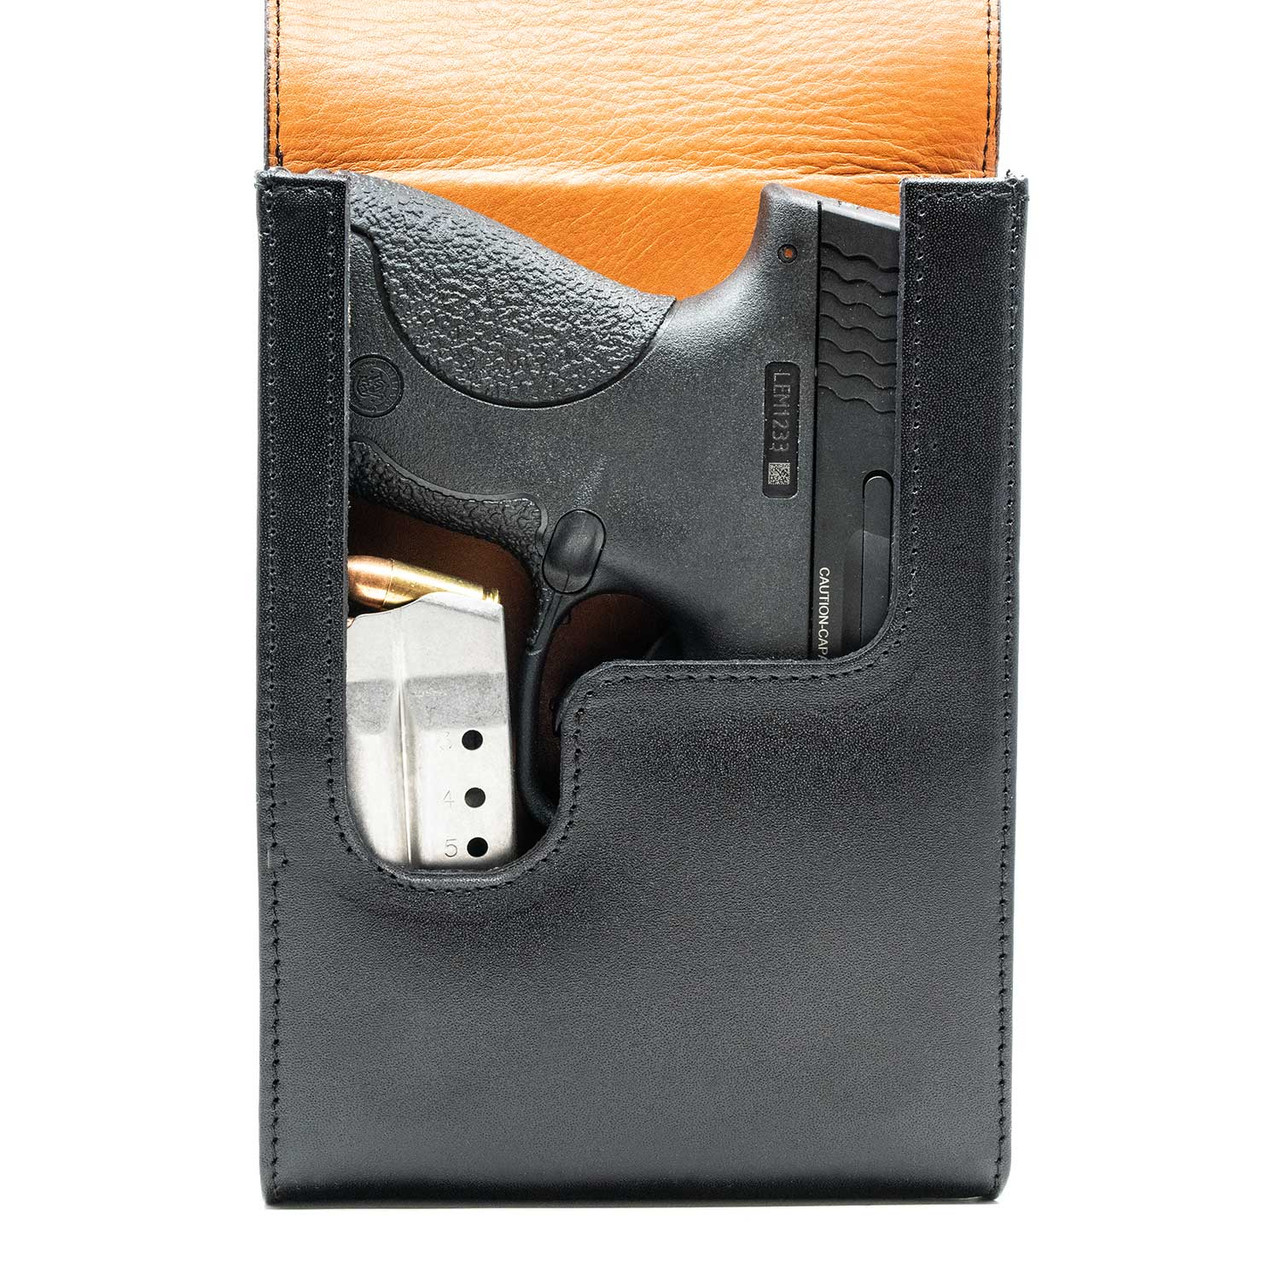 The Glock 27 Xtra Mag Black Leather Holster